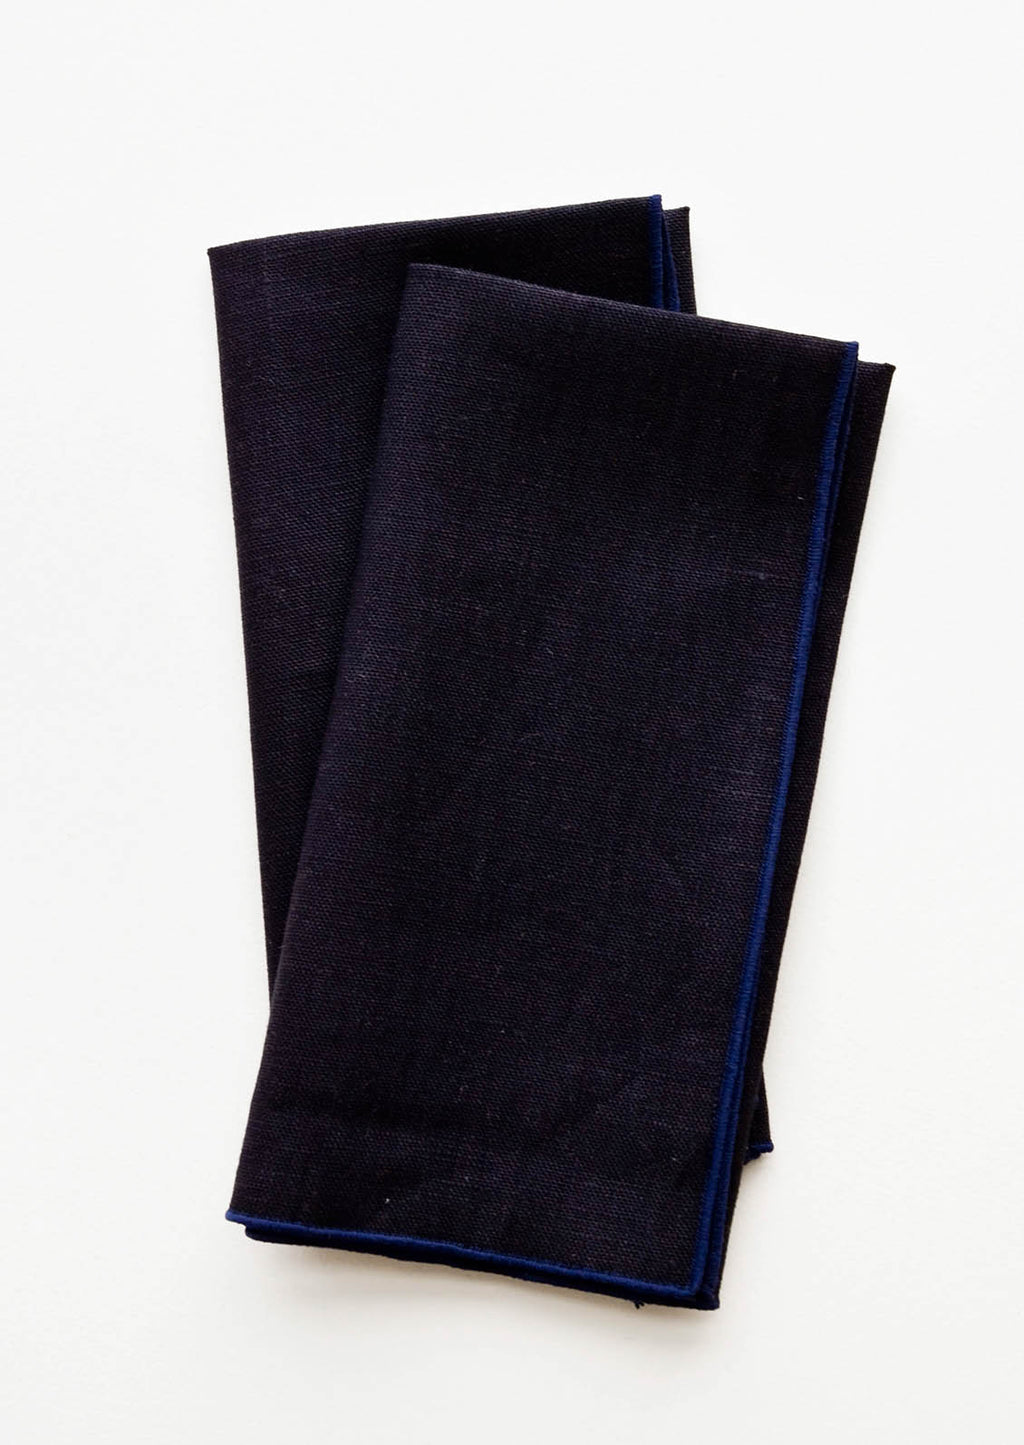 Ink Blue: Pair of folded Linen Napkins in Navy Blue.